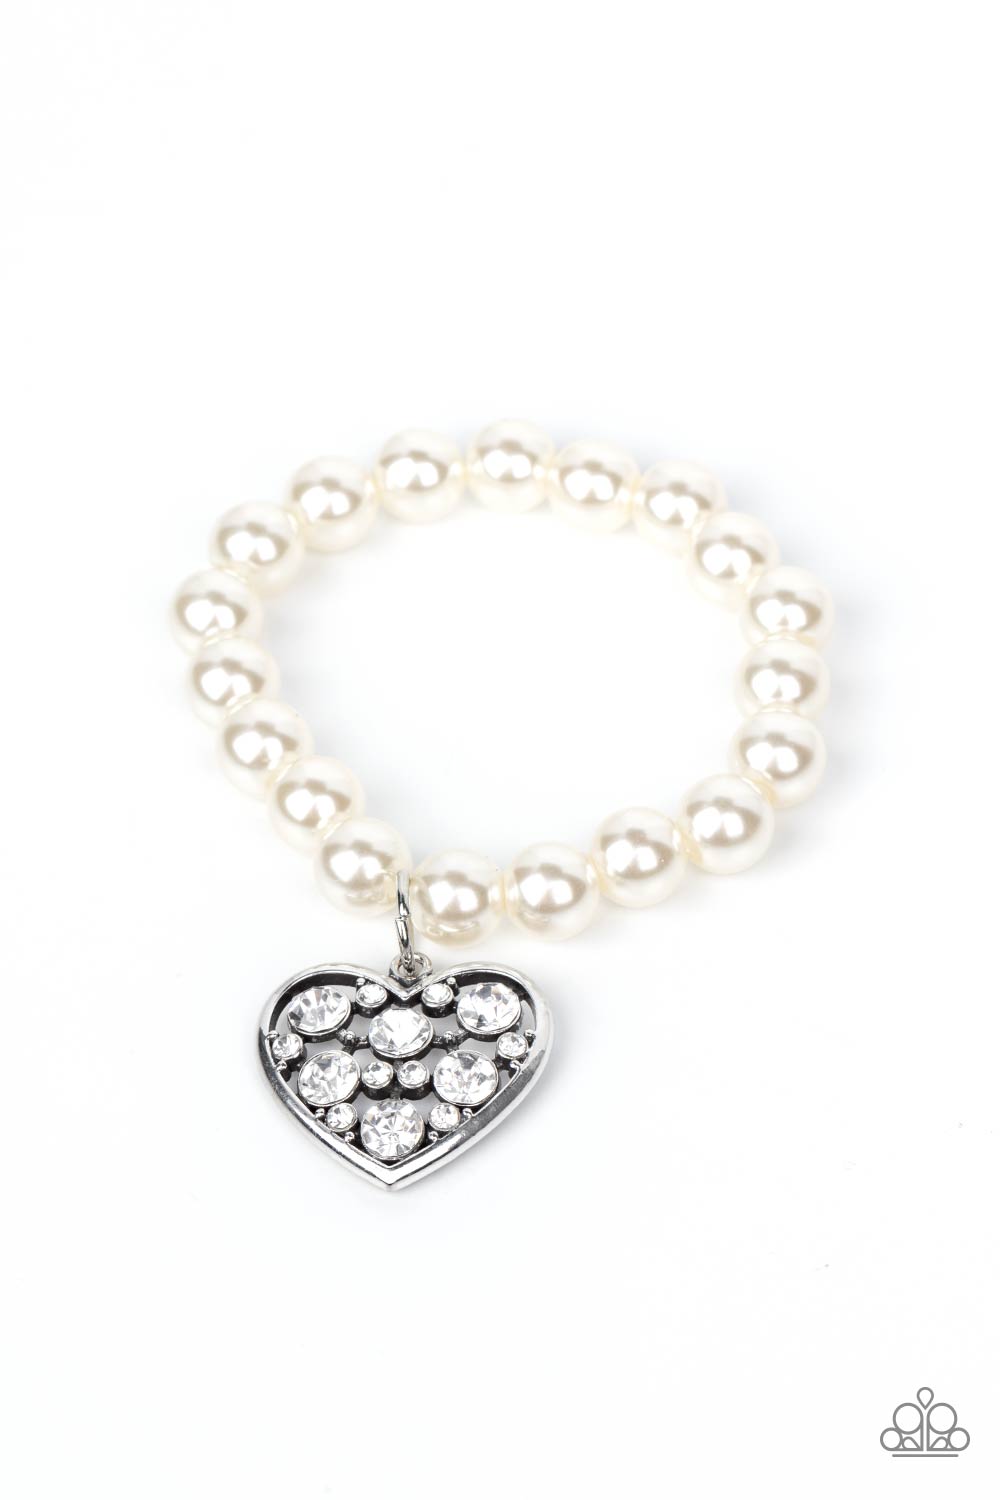 Cutely Crushing - White Pearl Heart Bracelets - Paparazzi dramatically oversized white rhinestone encrusted silver heart charm dangles from a stretchy strand of bubbly white pearls, creating a flirtatious dazzle.  Sold as one individual bracelet.  Paparazzi Jewelry is lead and nickel free so it's perfect for sensitive skin too!